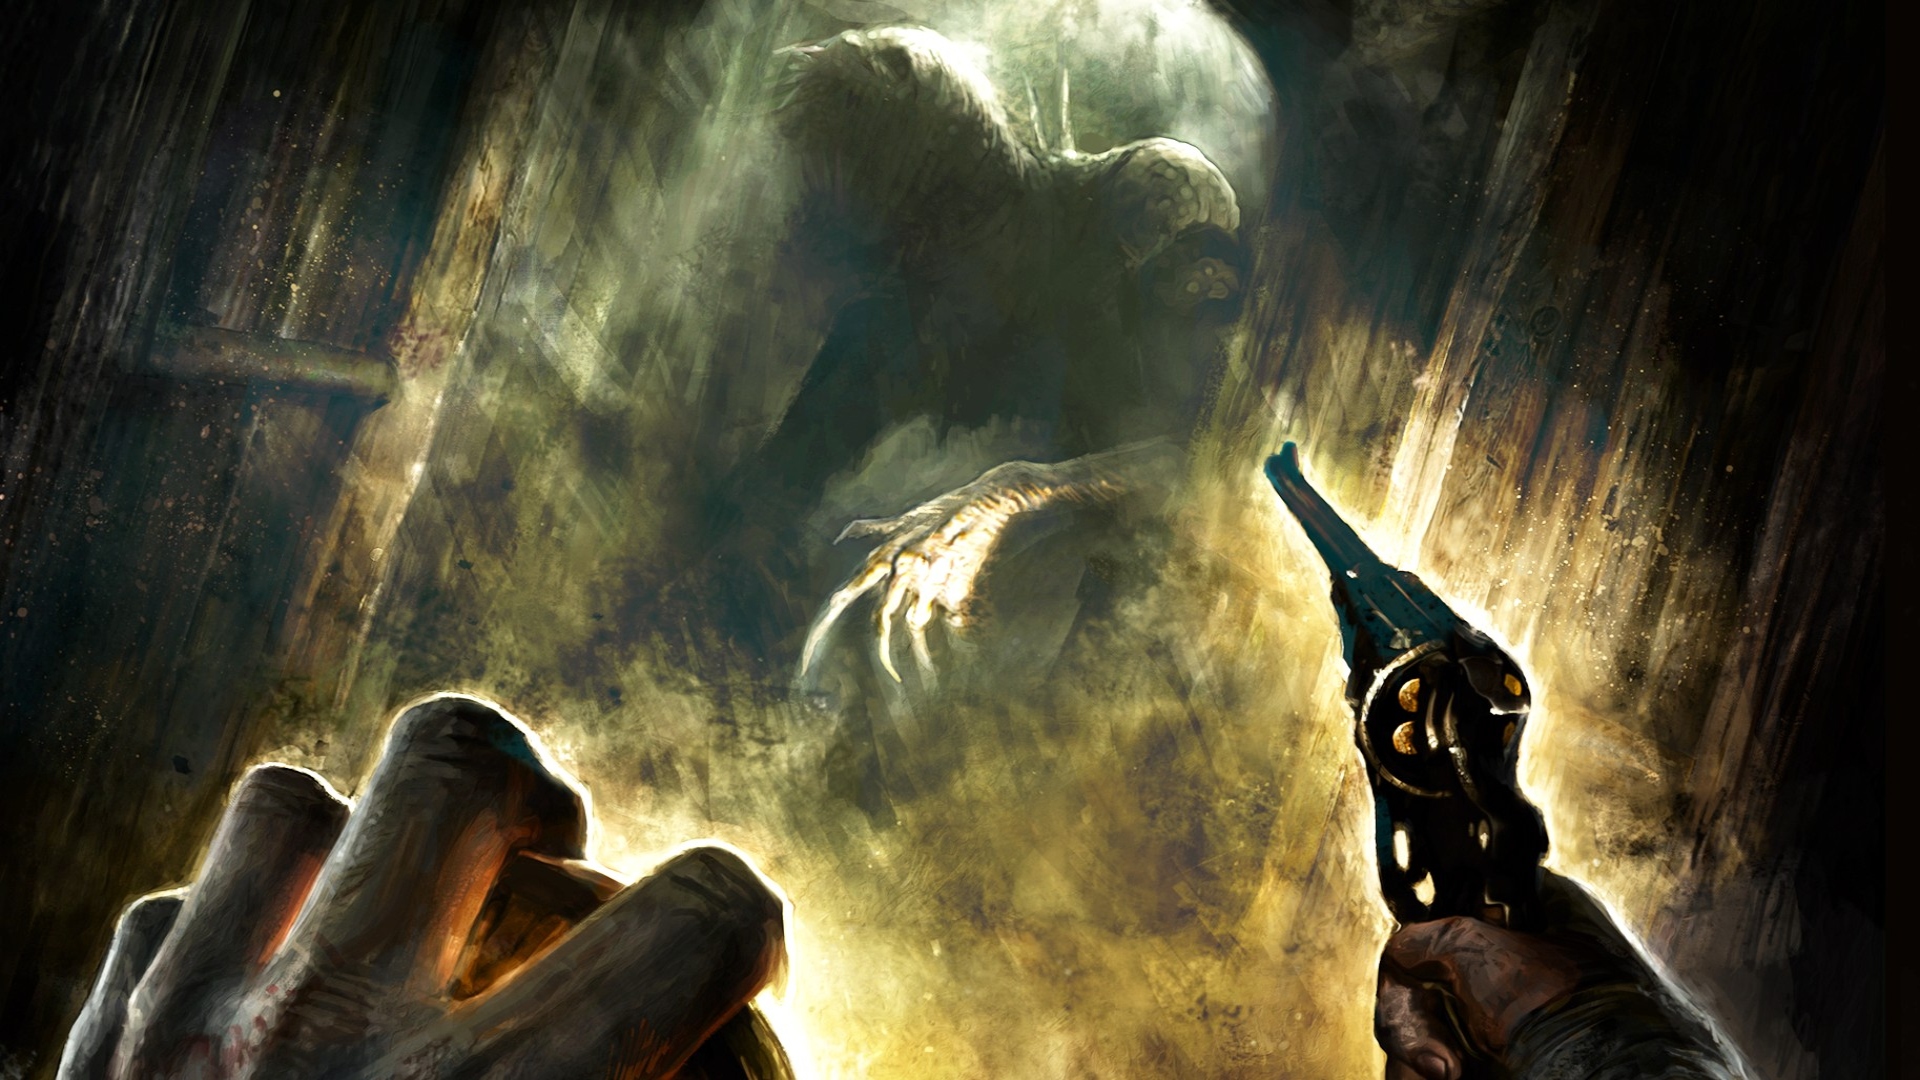 Horror game Amnesia returns, but it's open world and you have a gun